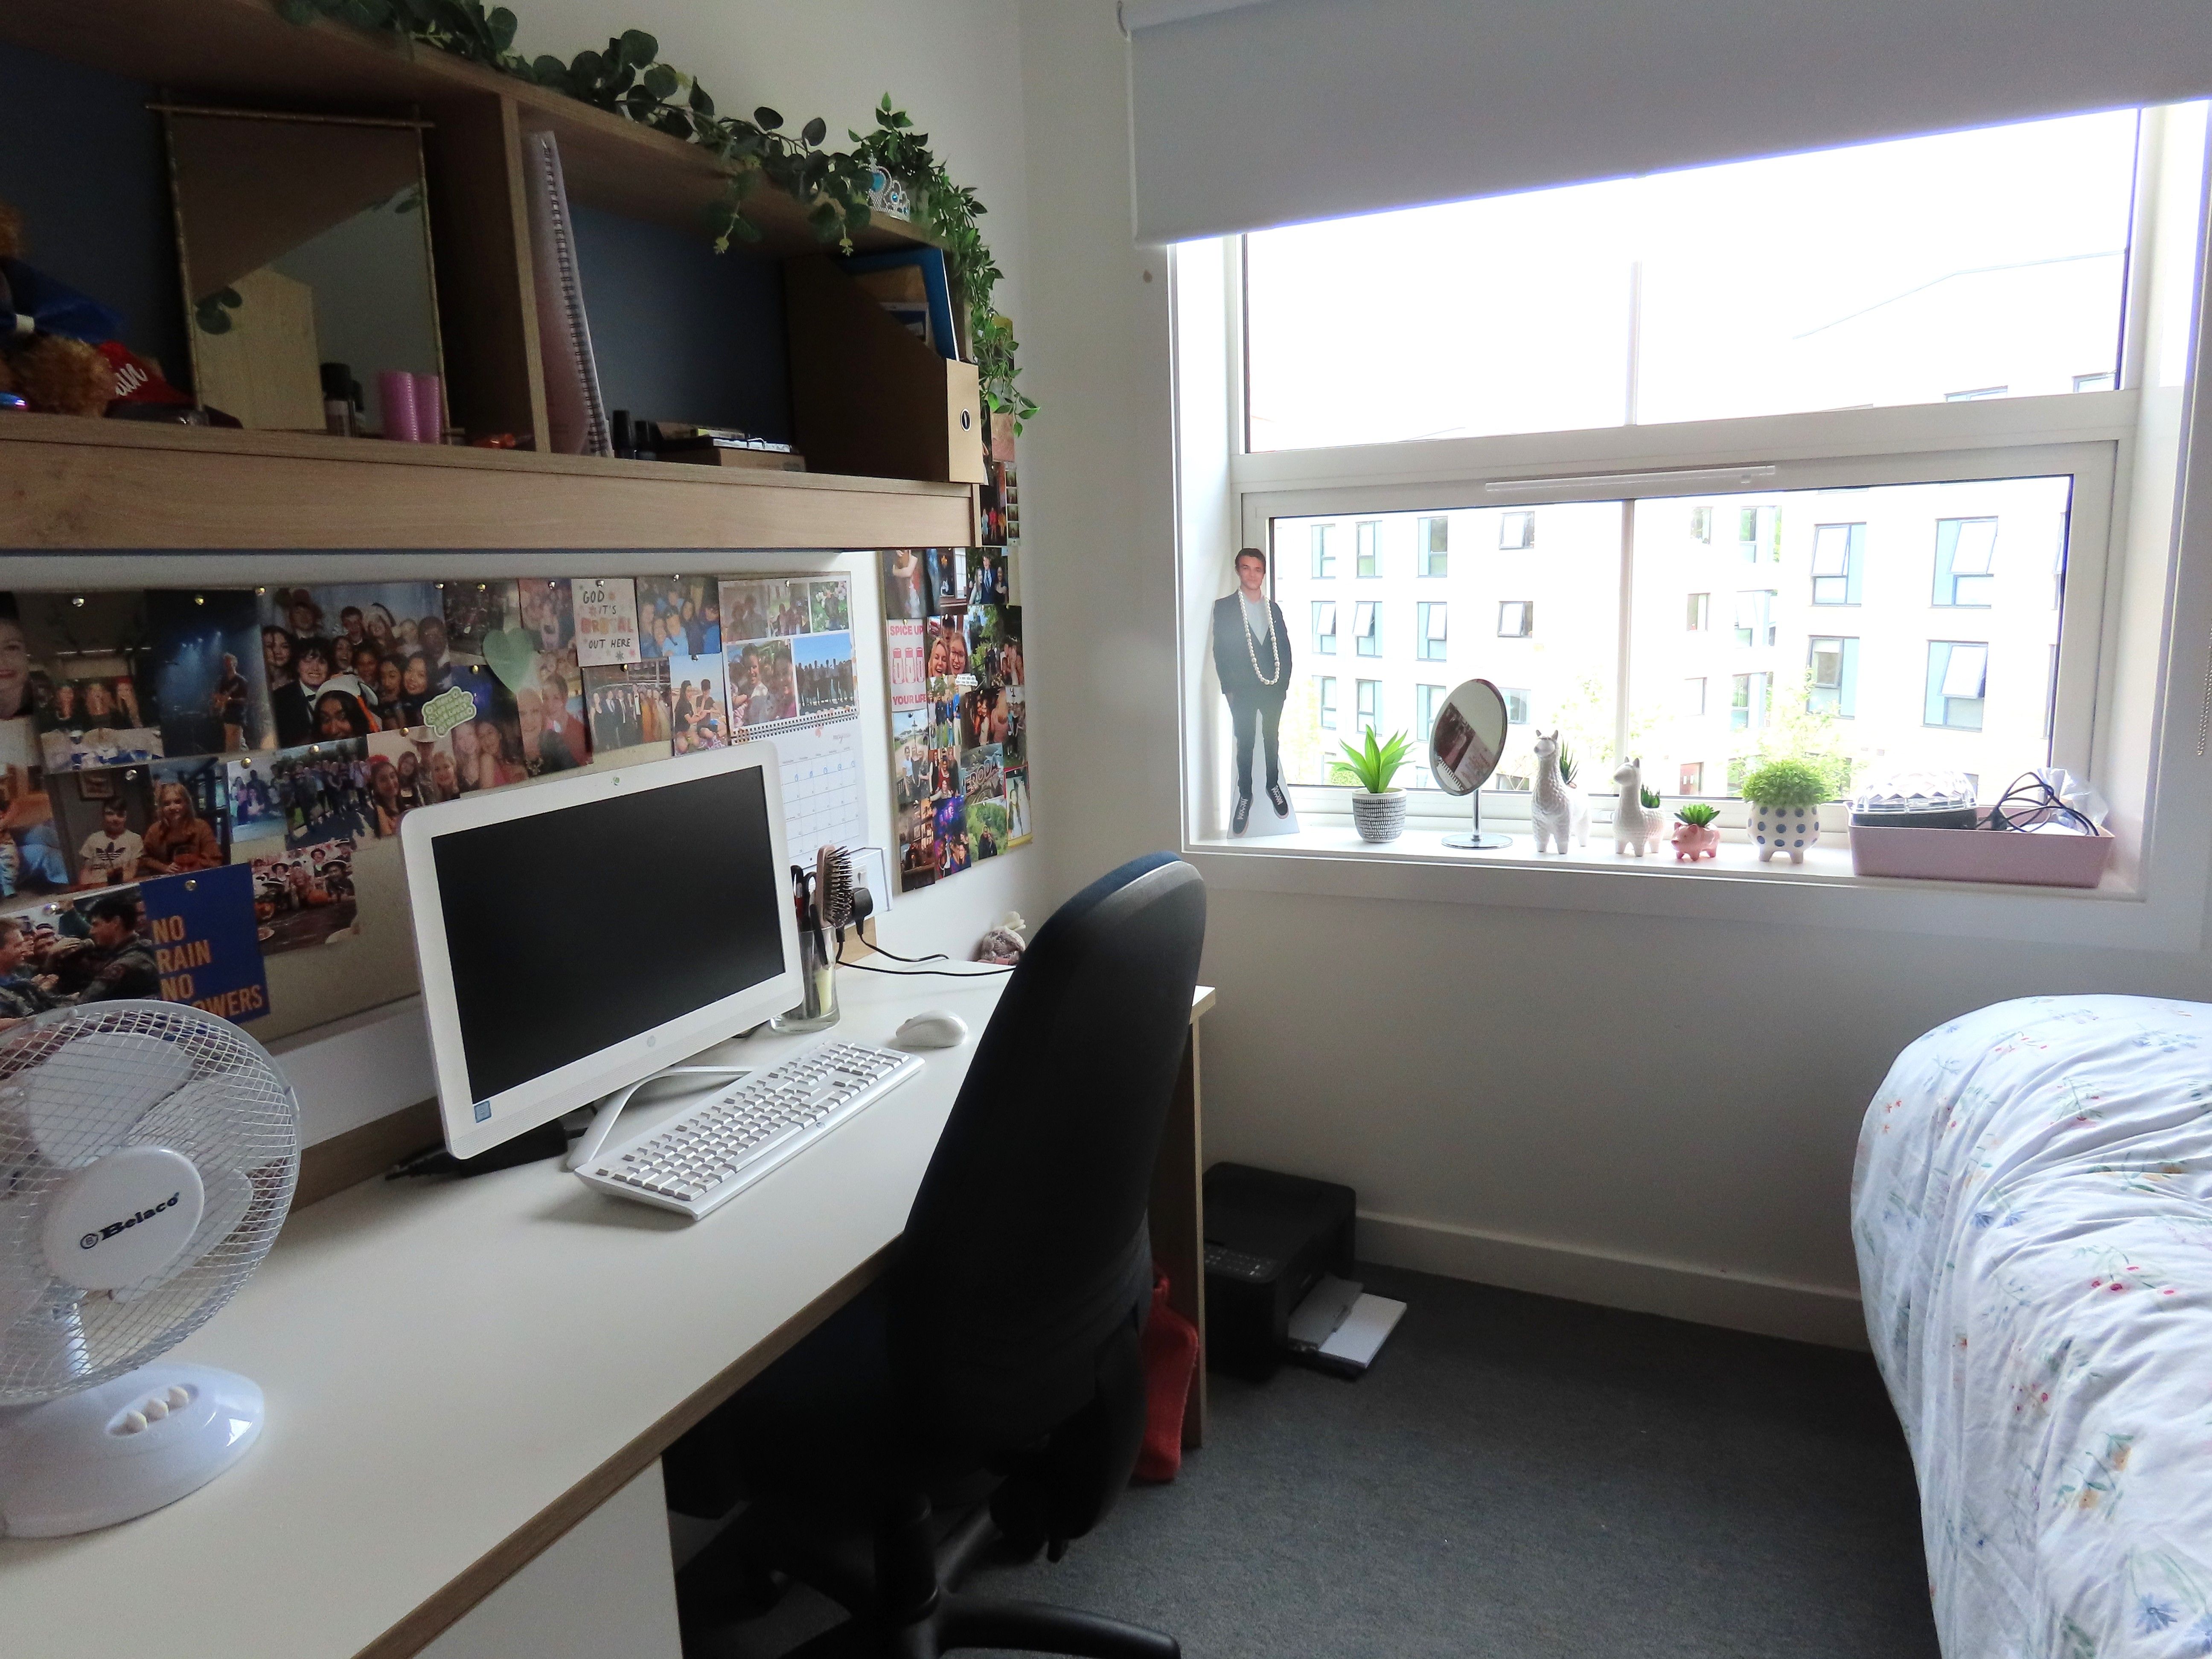 A view of student desk in one of or bedrooms.